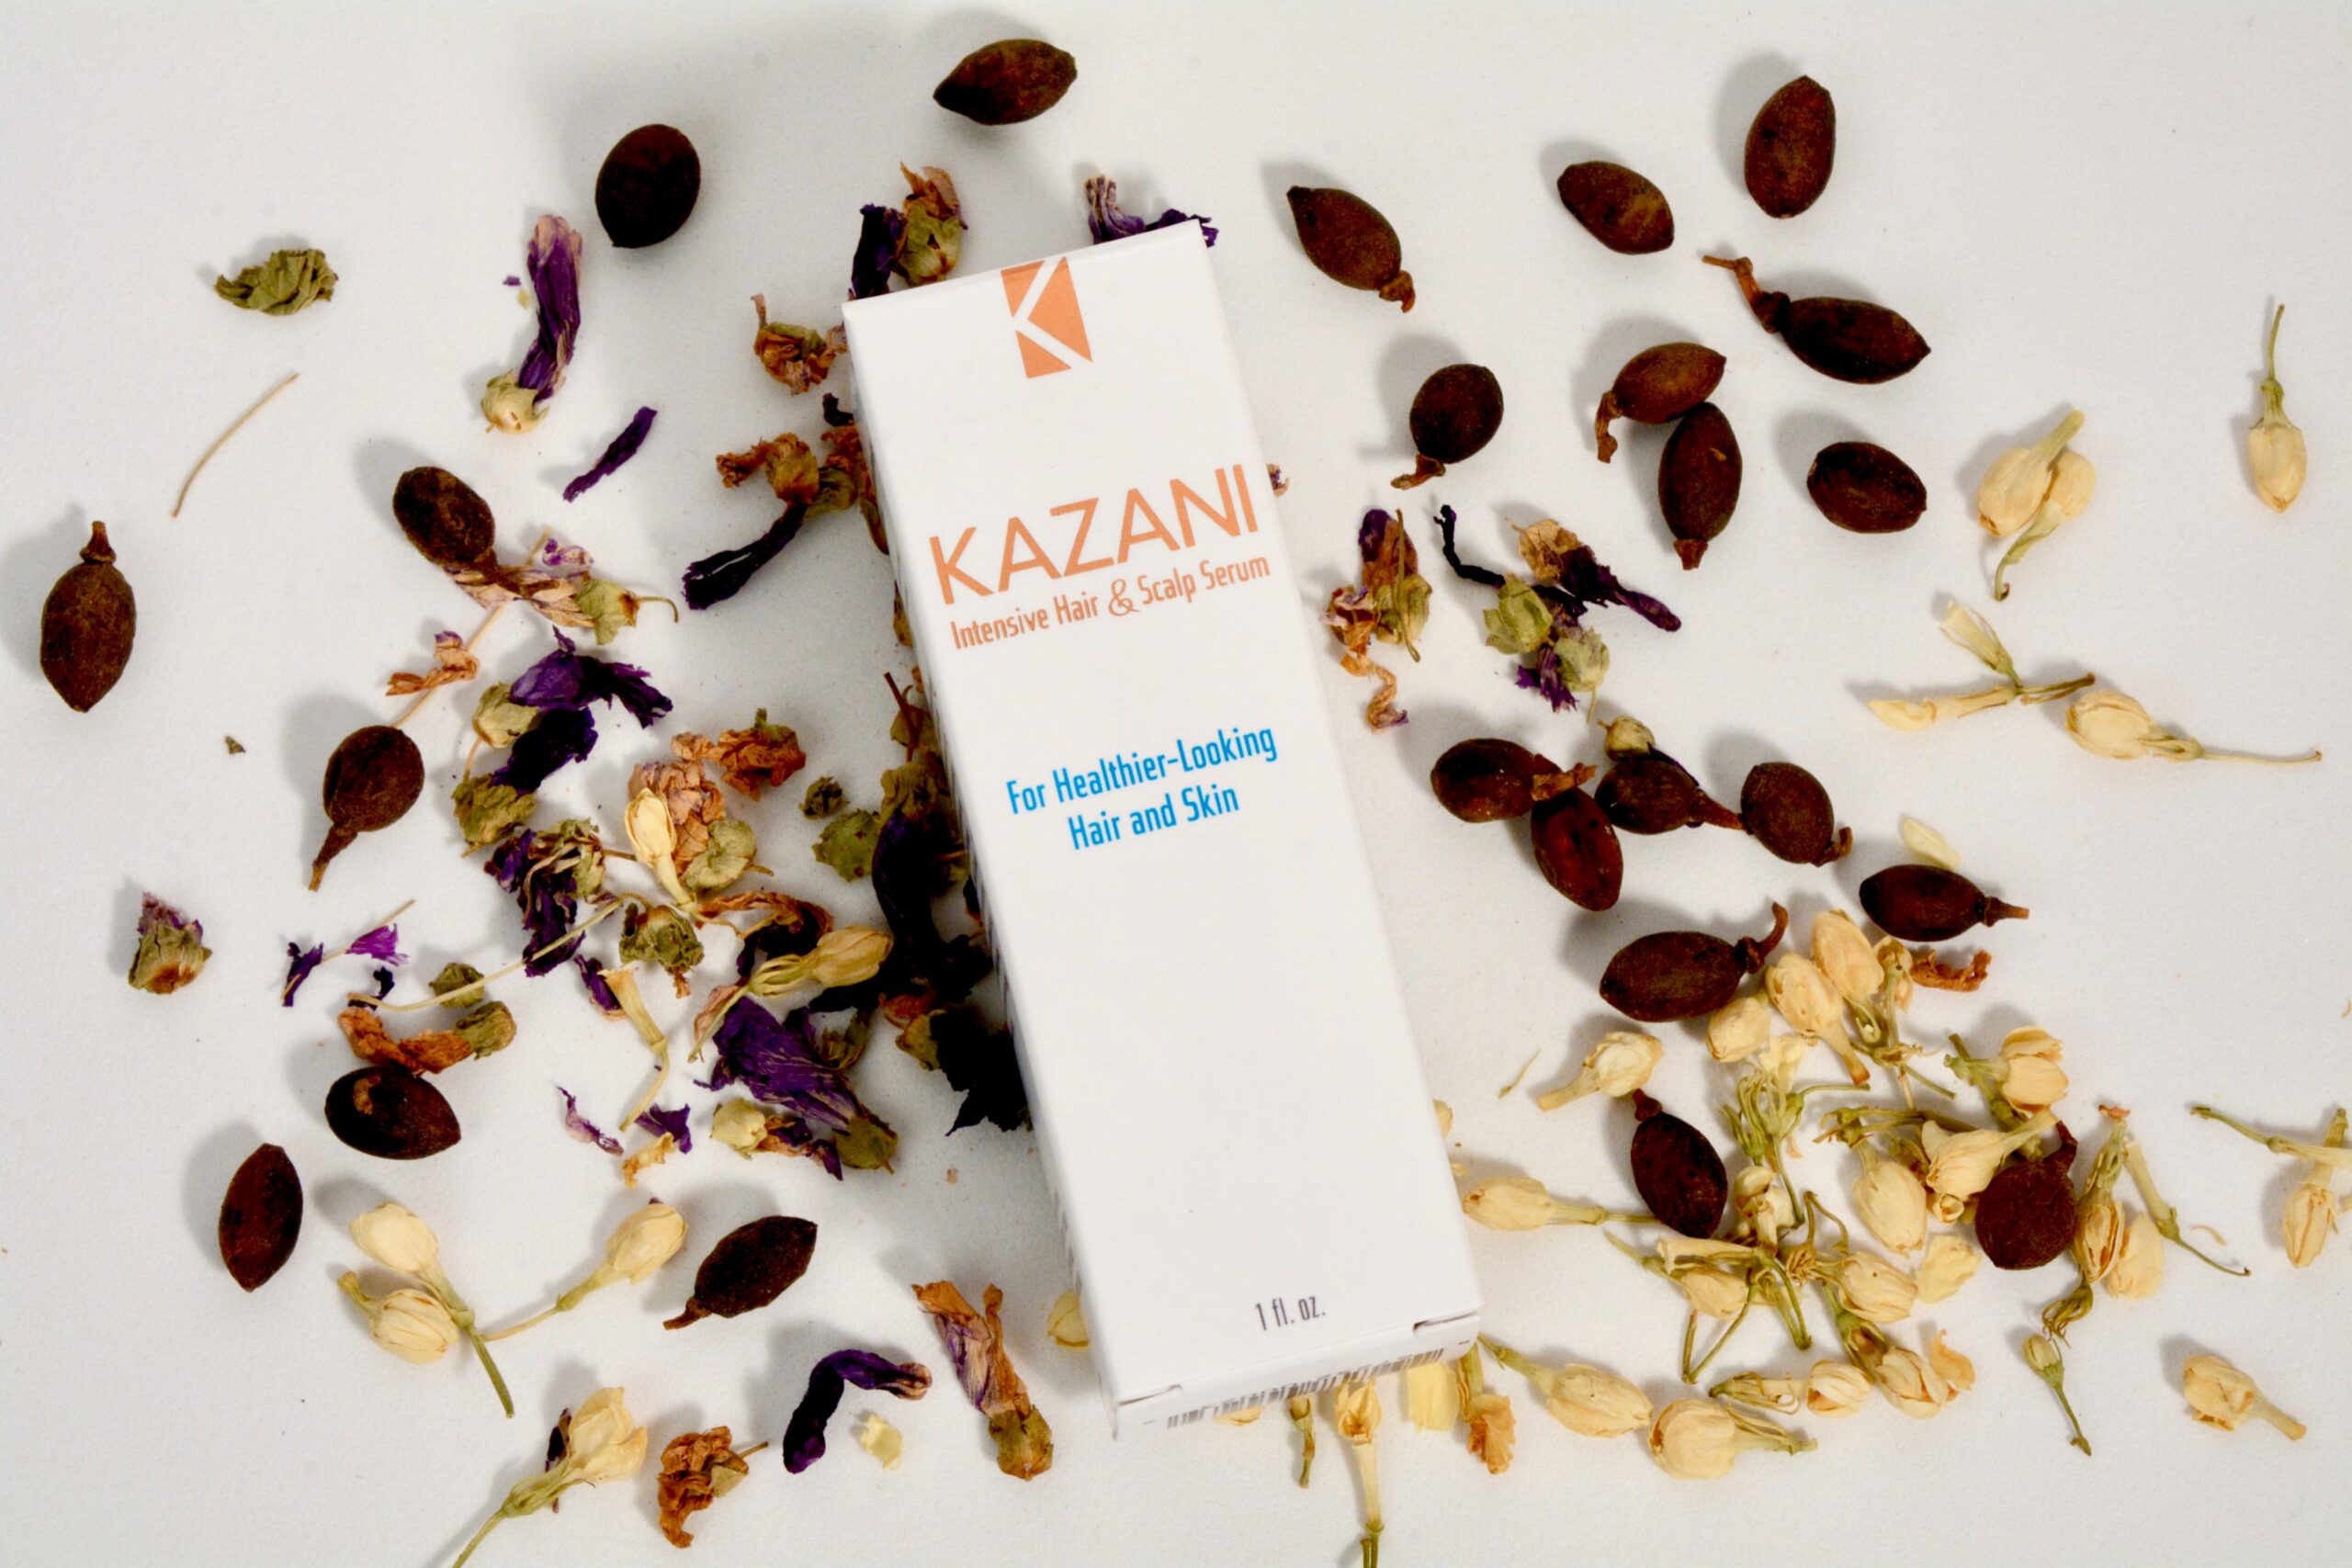 Kazani Intensive Hair and Scalp Serum with herbs and flower